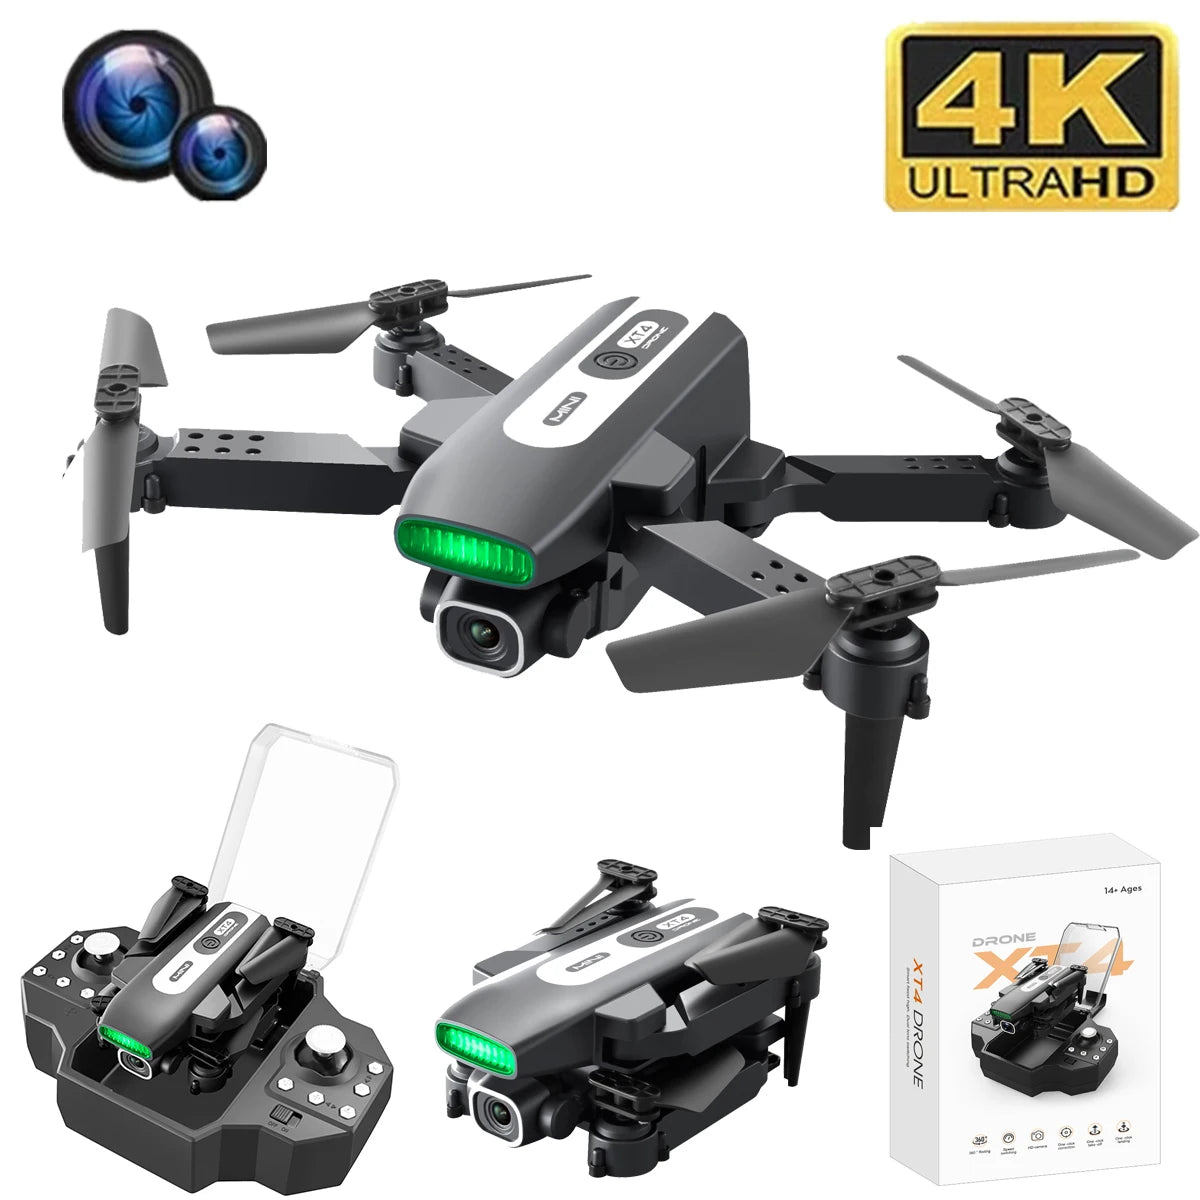 XT4 Mini Drone, it can capture stunning pictures and videos from the sky.